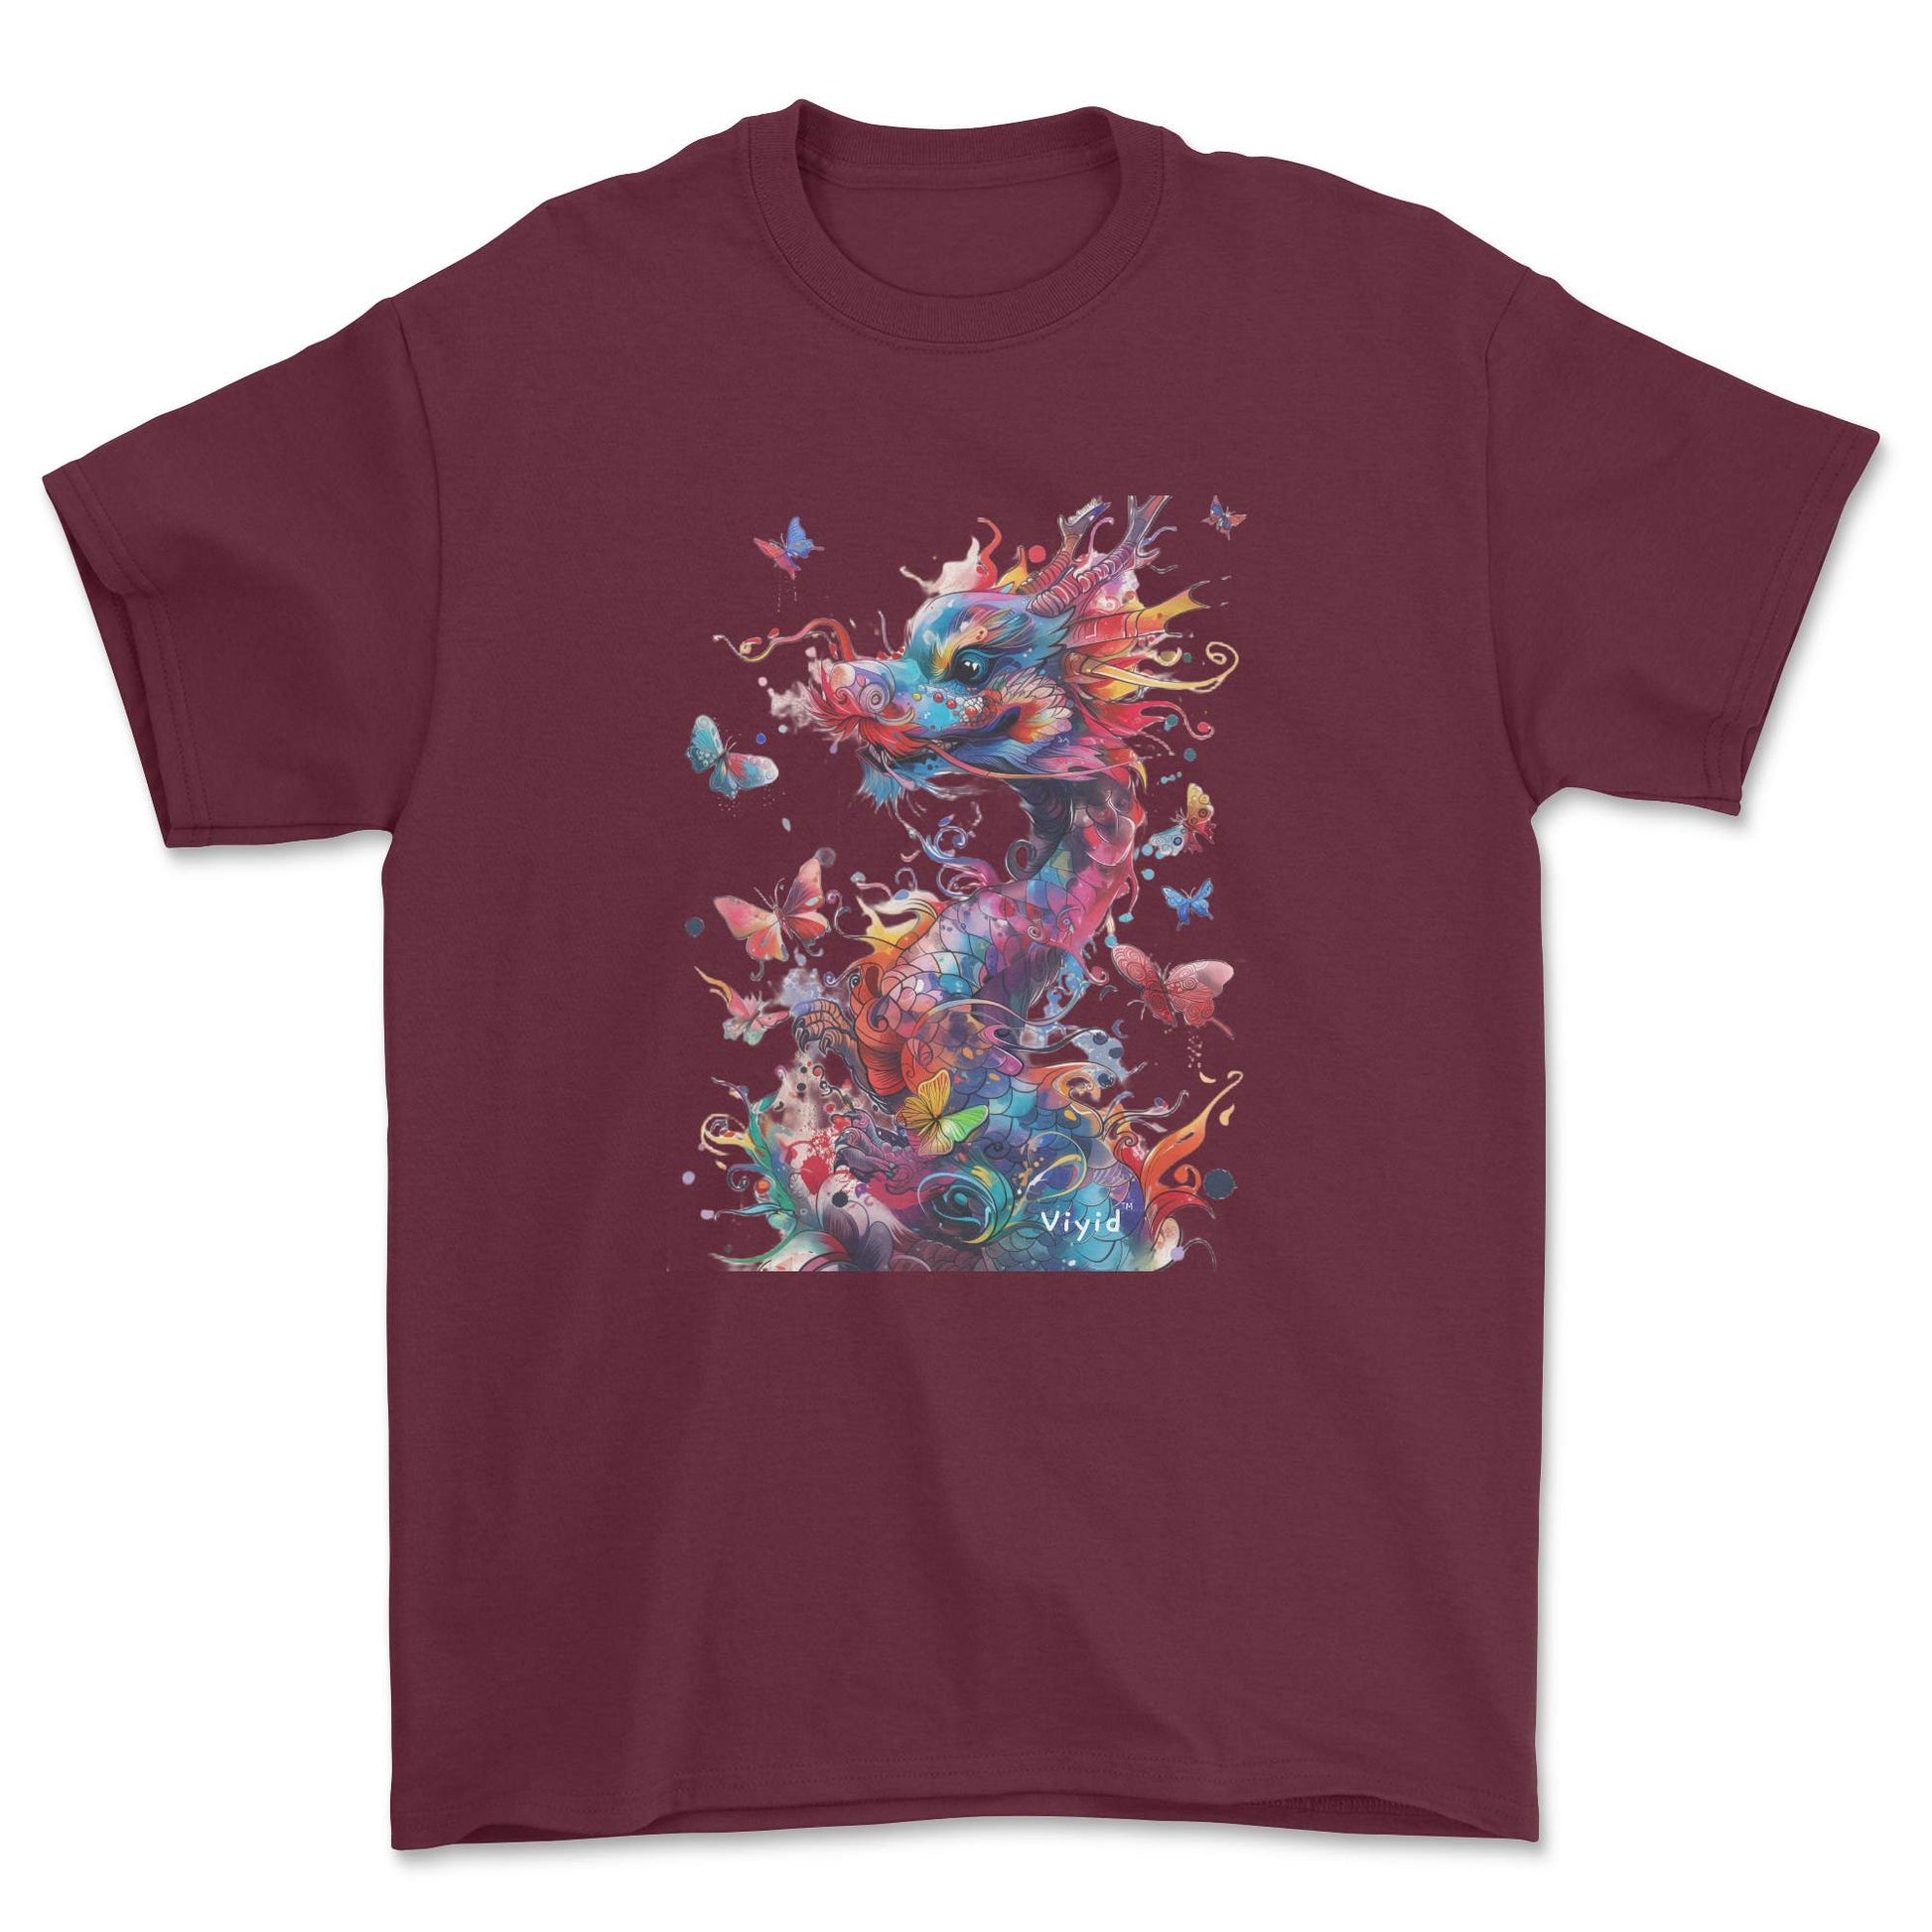  colorful dragon with butterflies adult t-shirt maroon